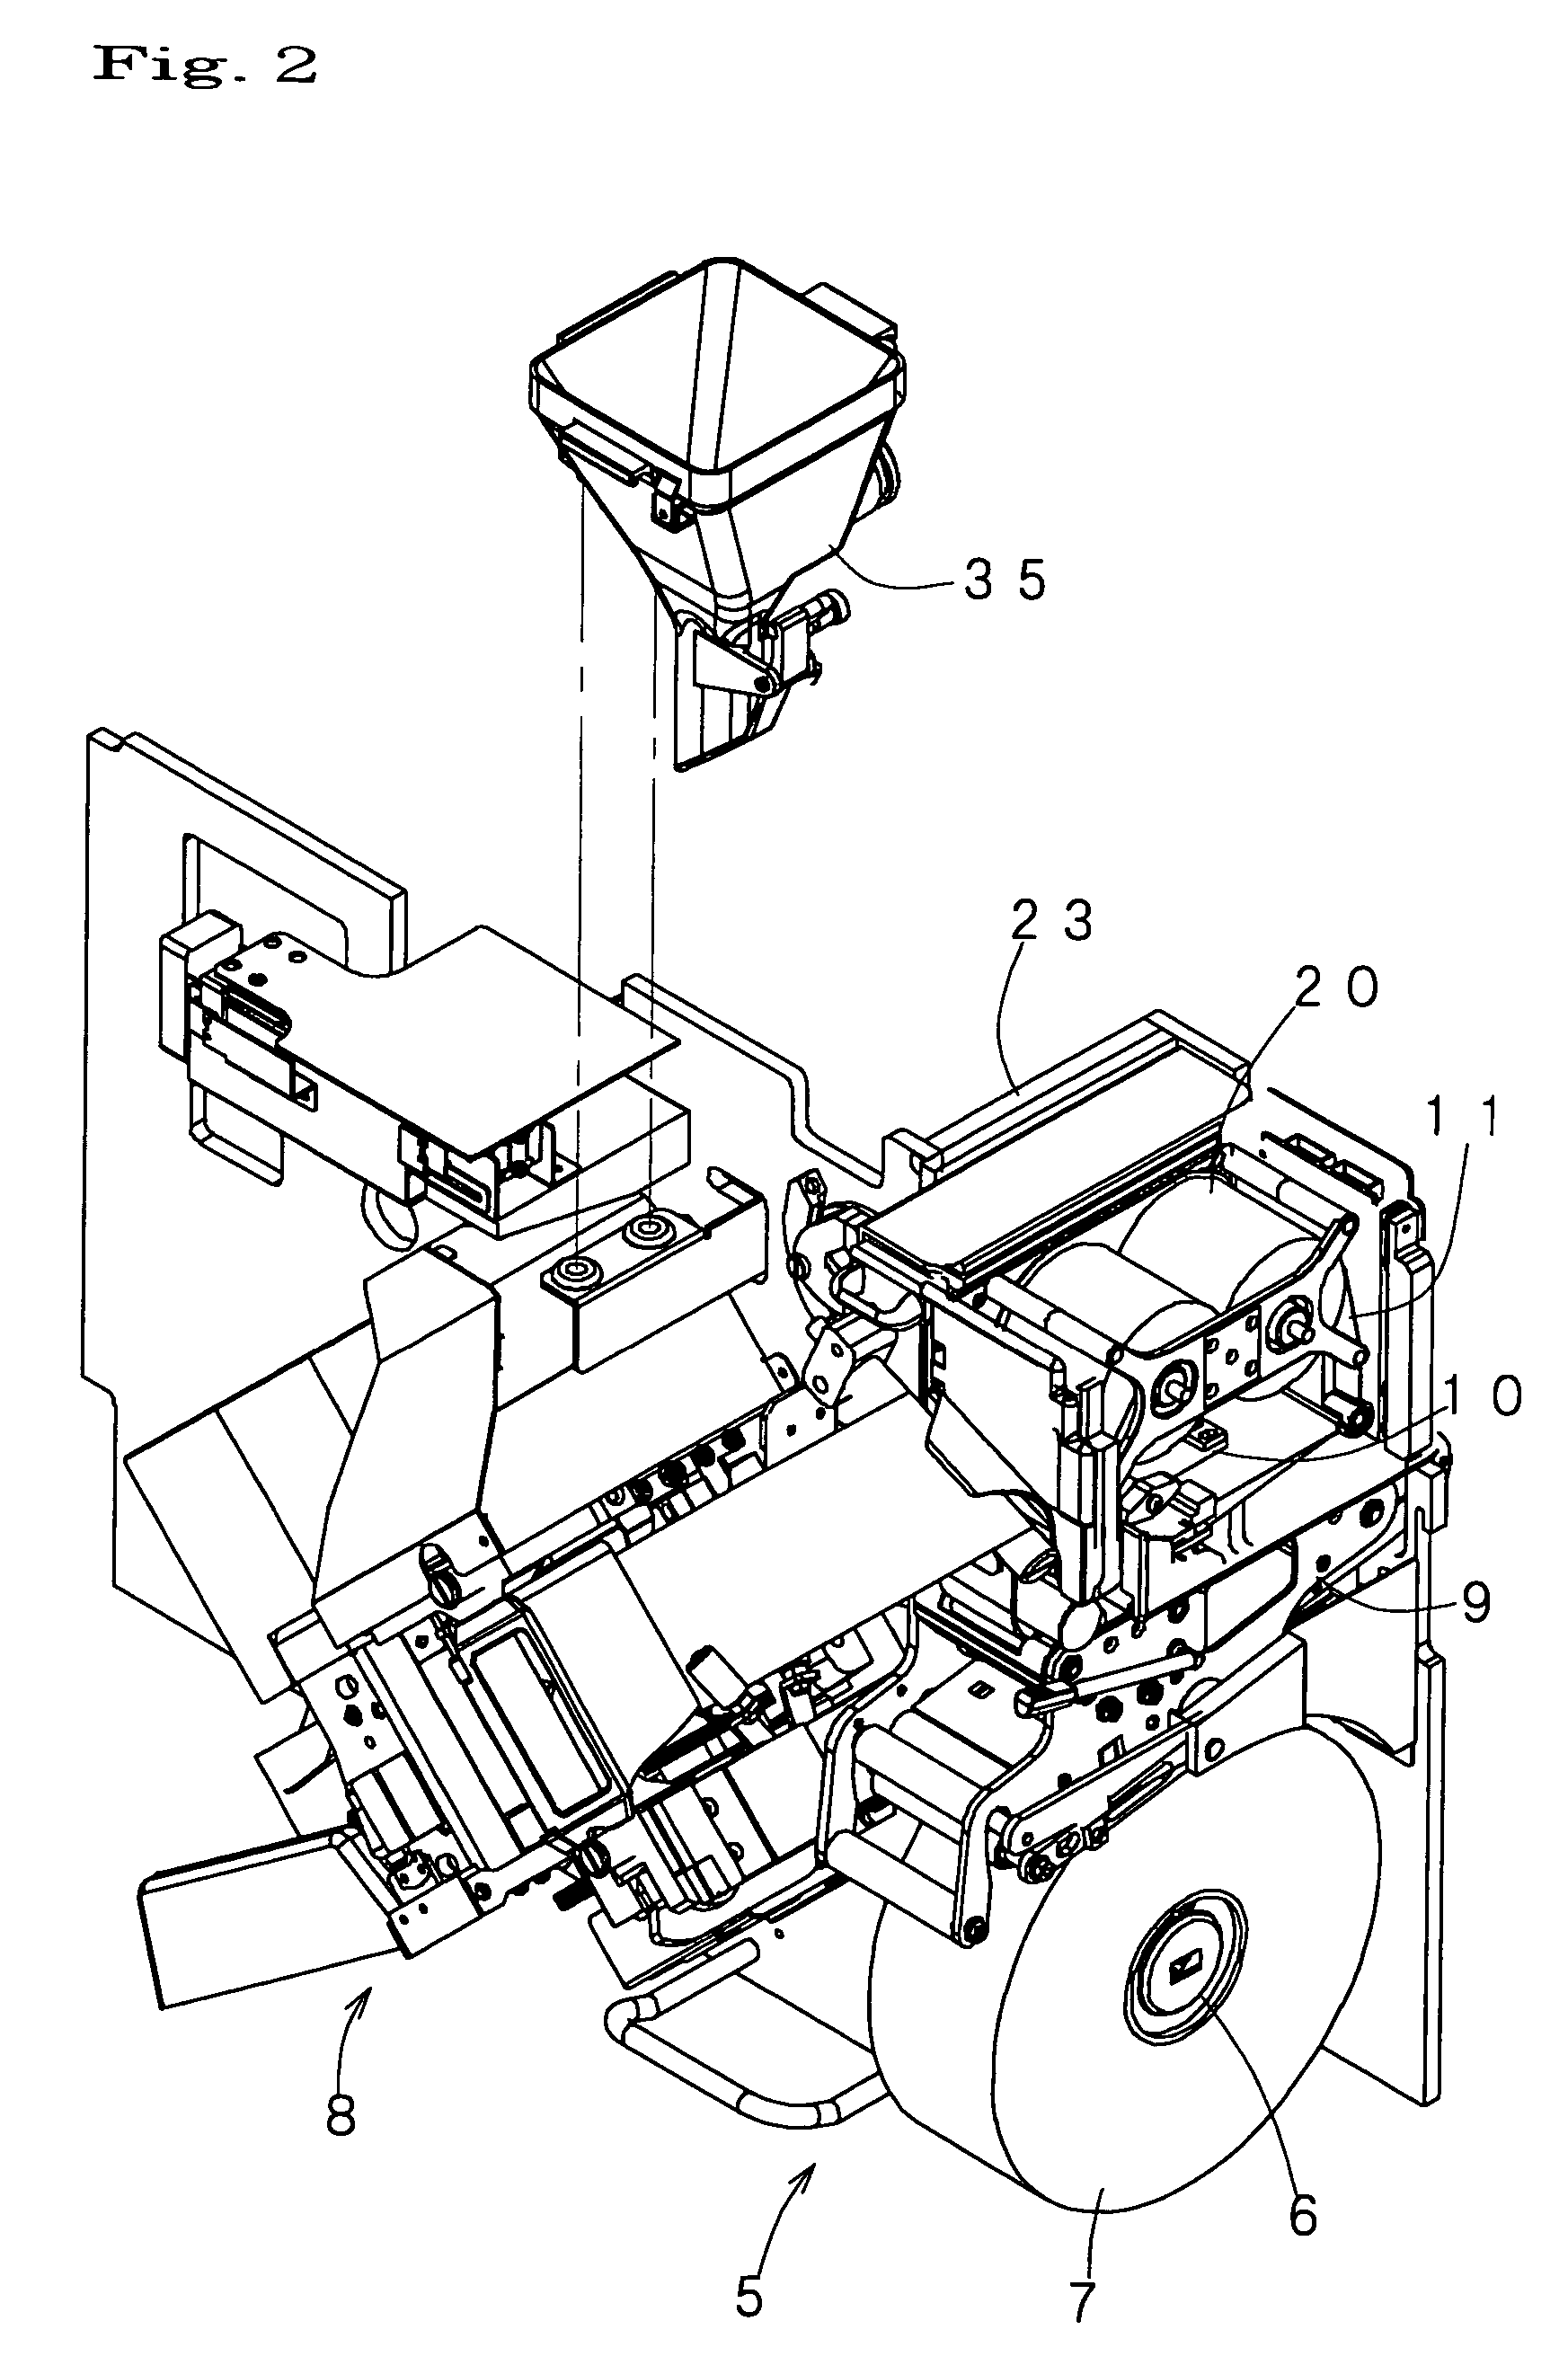 Medicine packaging device